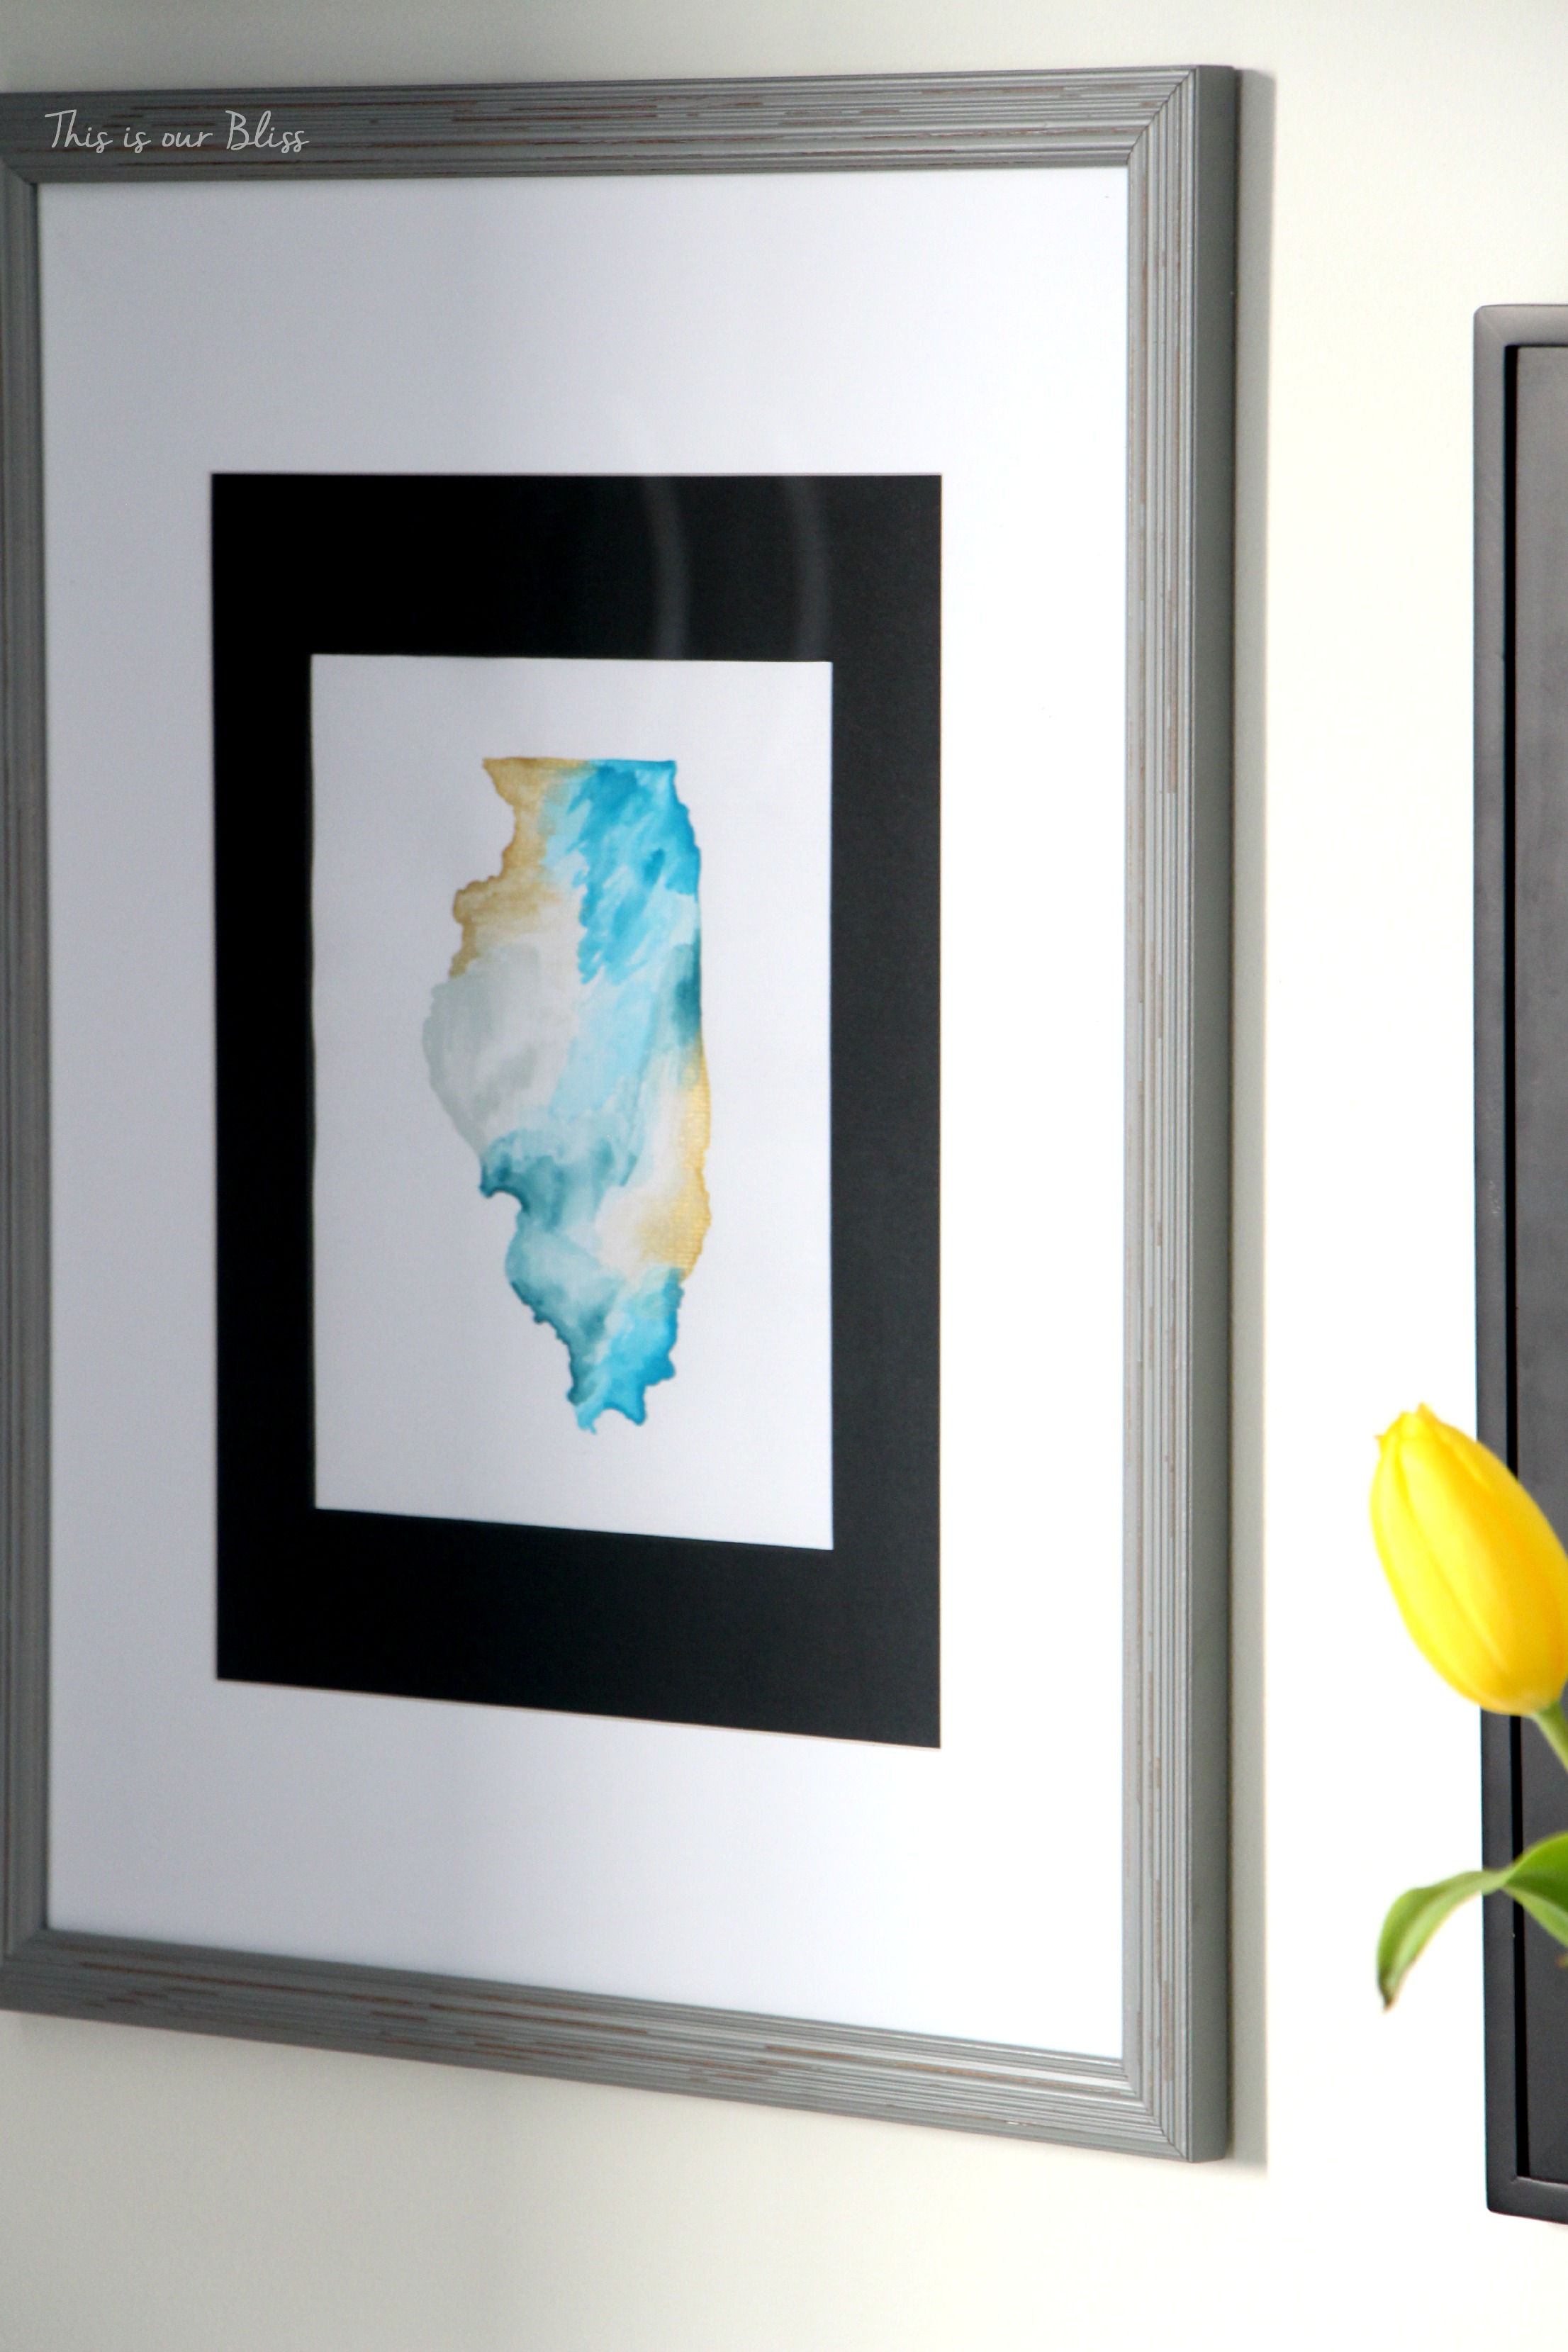 Guestroom revamp - gallery wall - Illinois watercolor - This is our Bliss